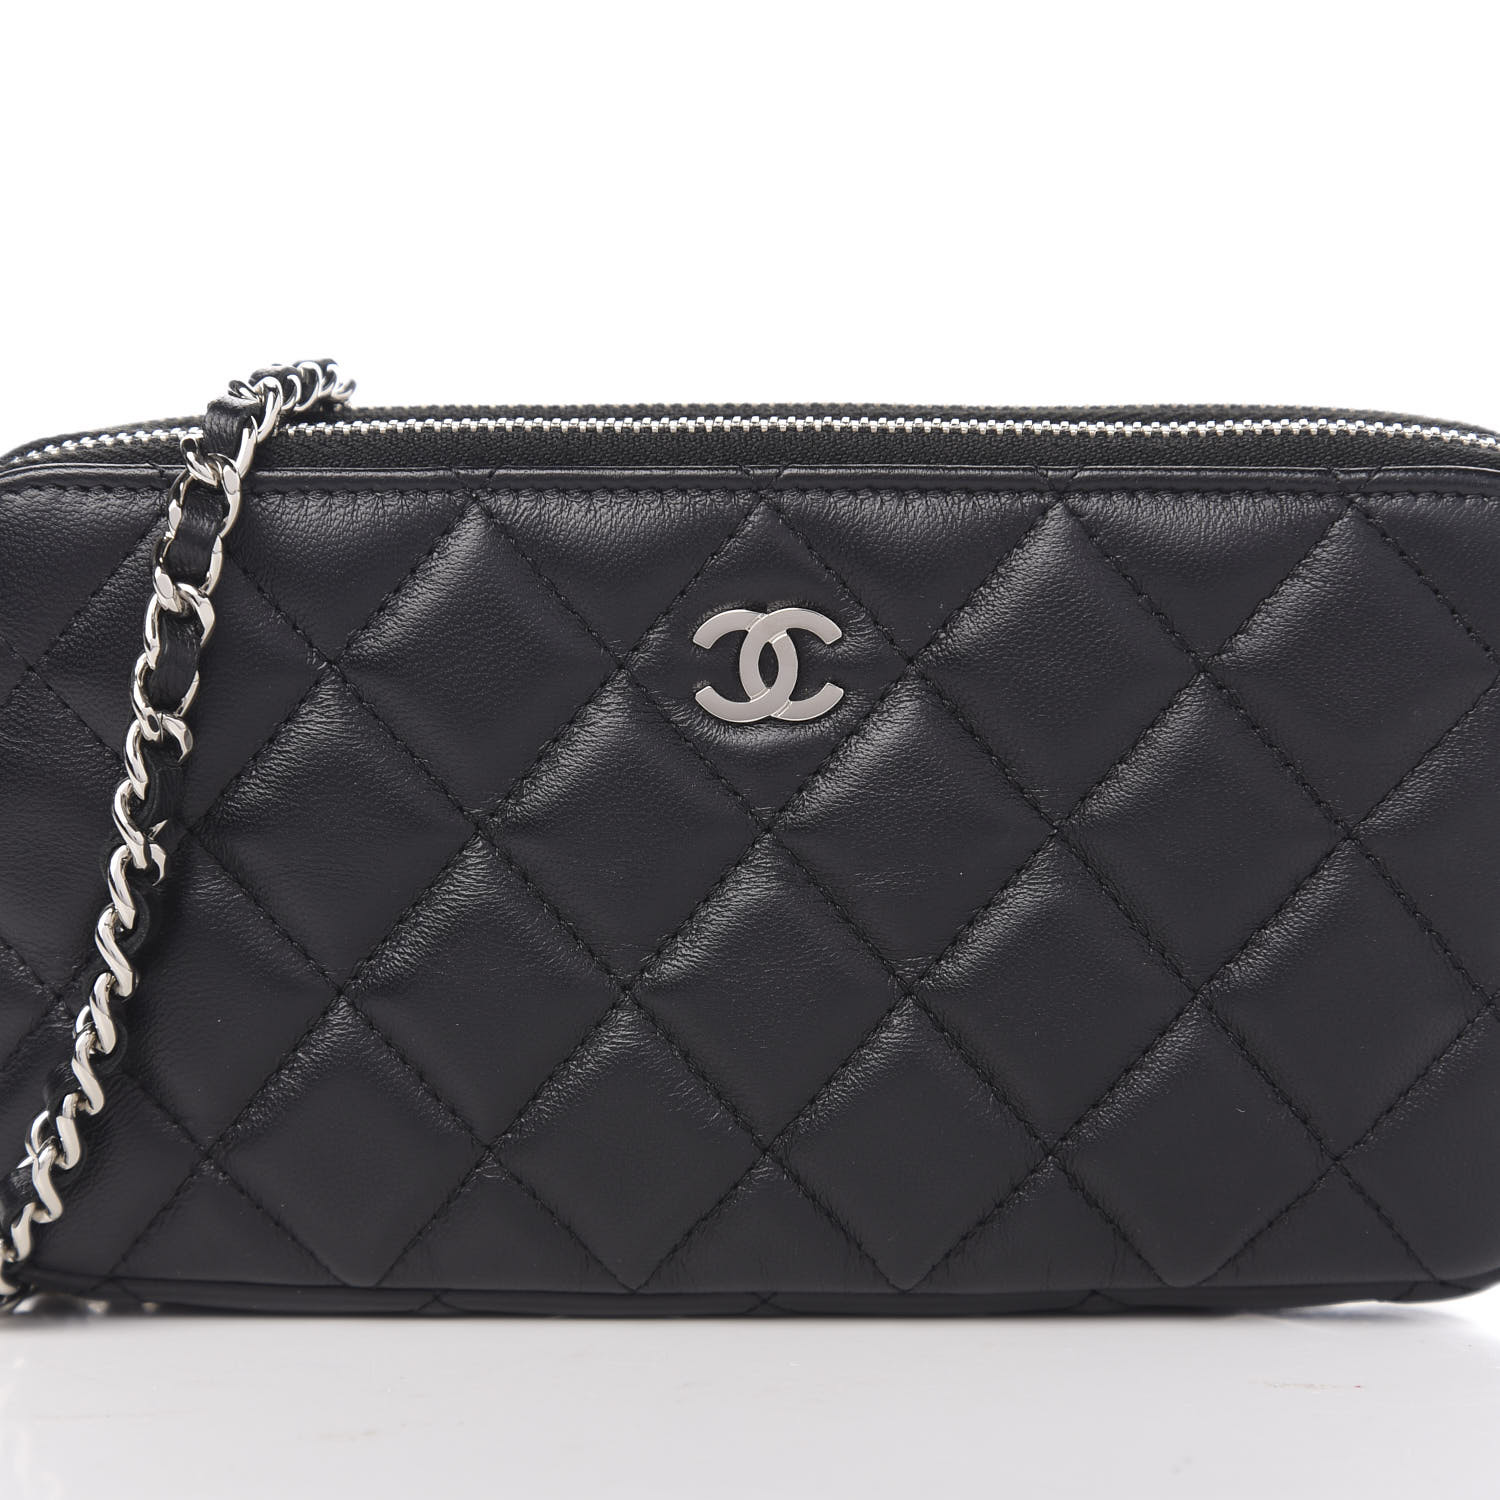 CHANEL Quilted Small Clutch With Chain Black 588667 | FASHIONPHILE